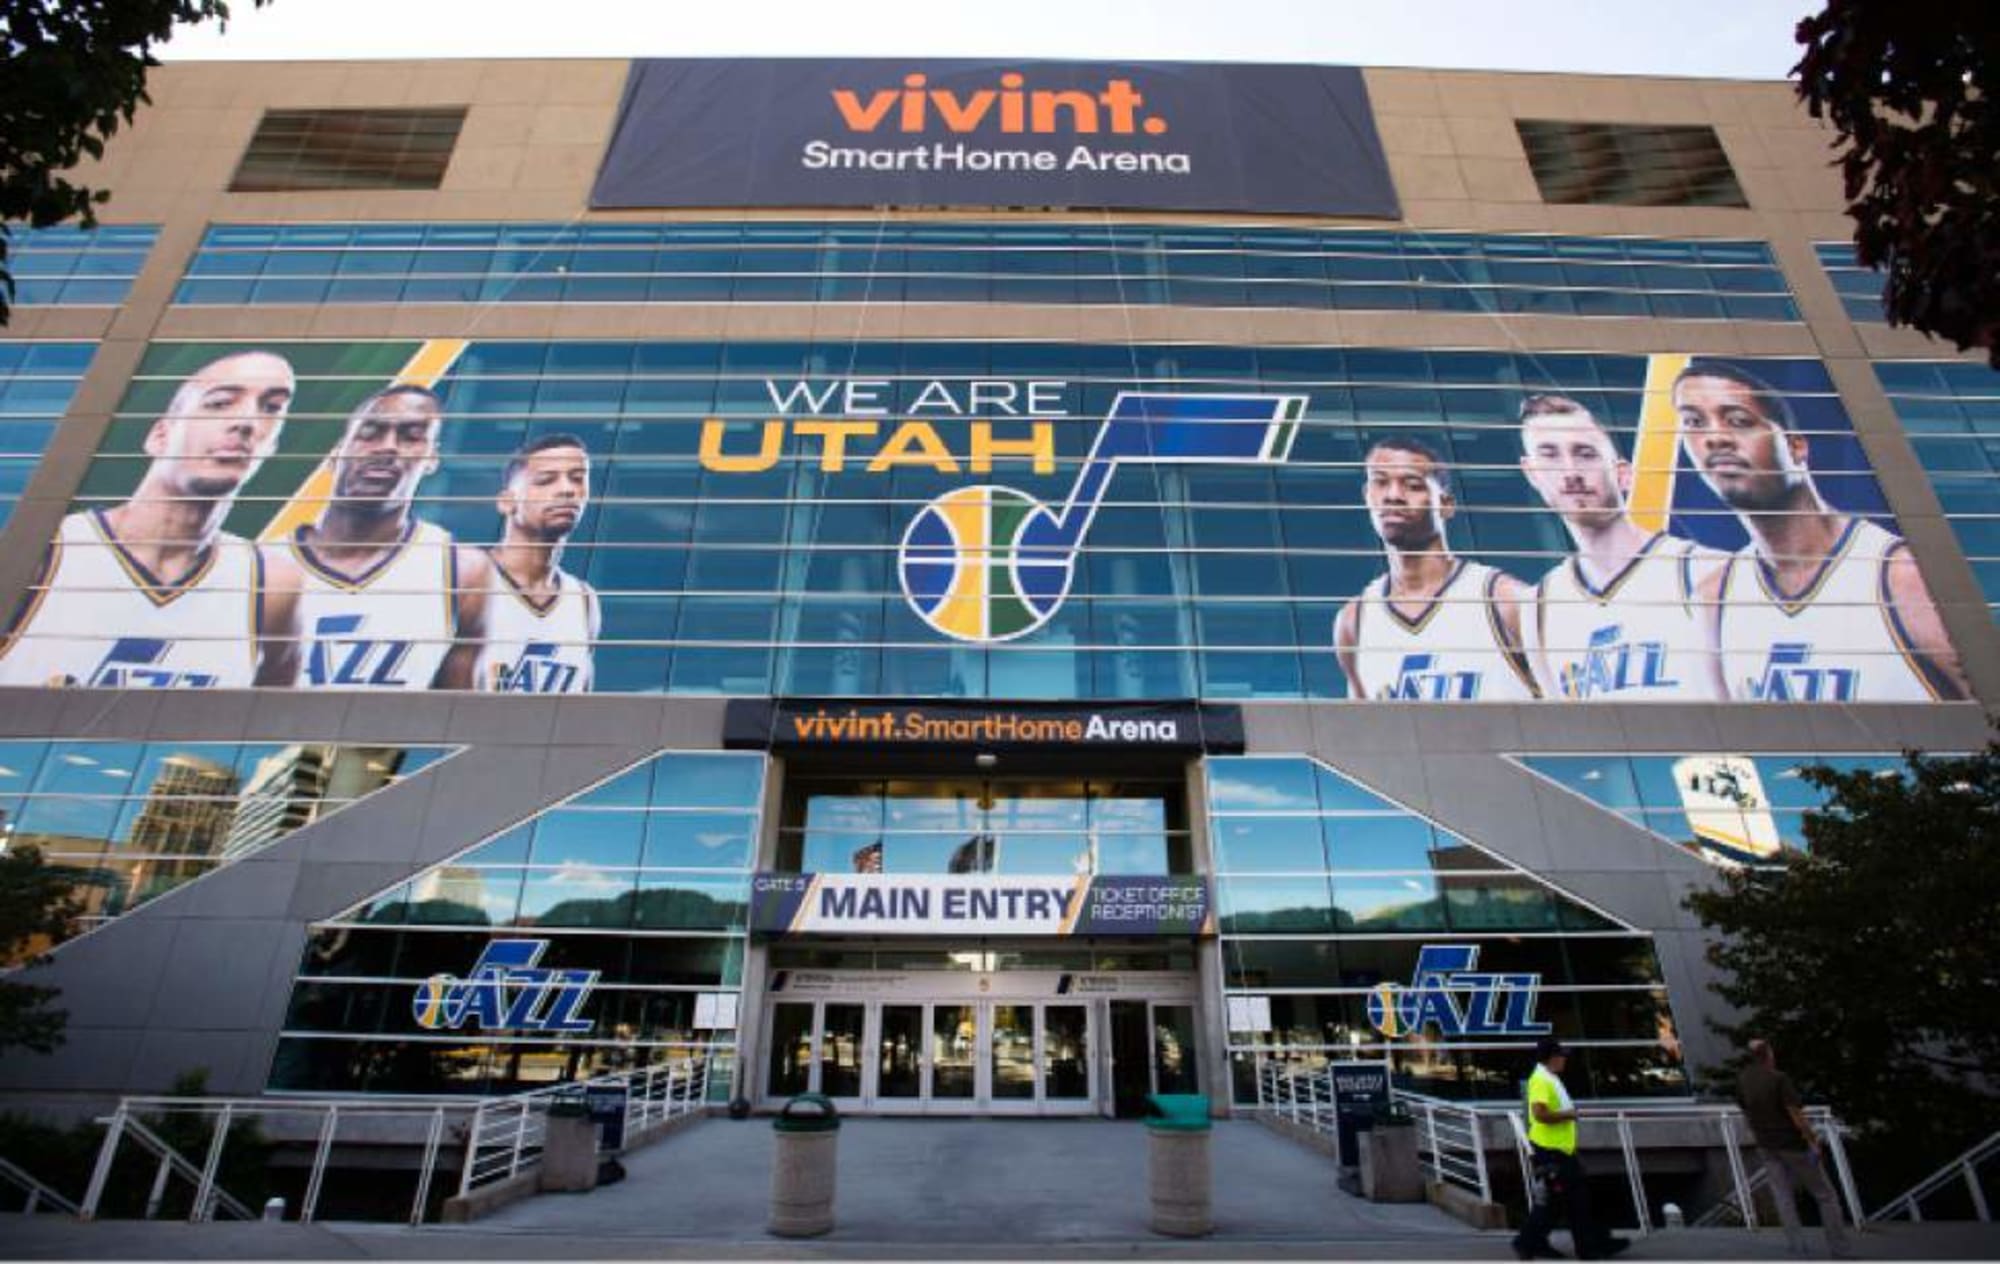 Utah Jazz fans are going to love the new look uniforms and court